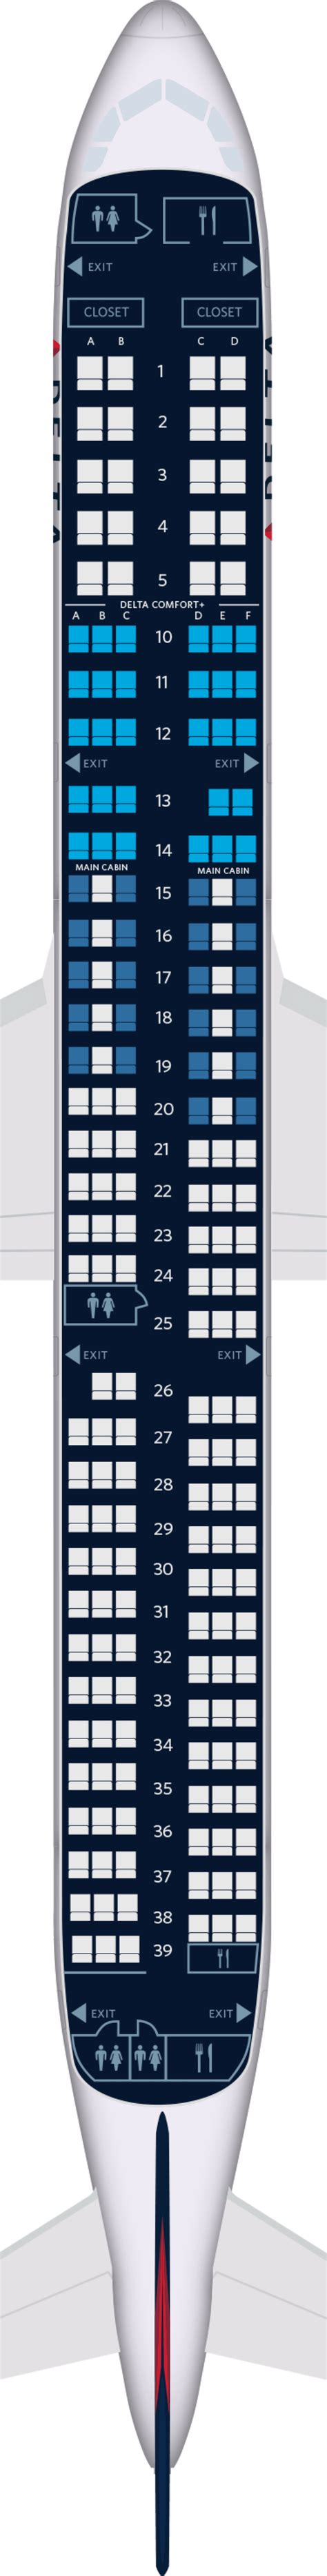 15. Economy. 31 -32. 17 -18.1. 6-34. 156. Find the best seat wiht our American Airlines Airbus A321 v2 seating chart. Use this seat map to get the most comfortable seats, legroom and recline before booking. . 